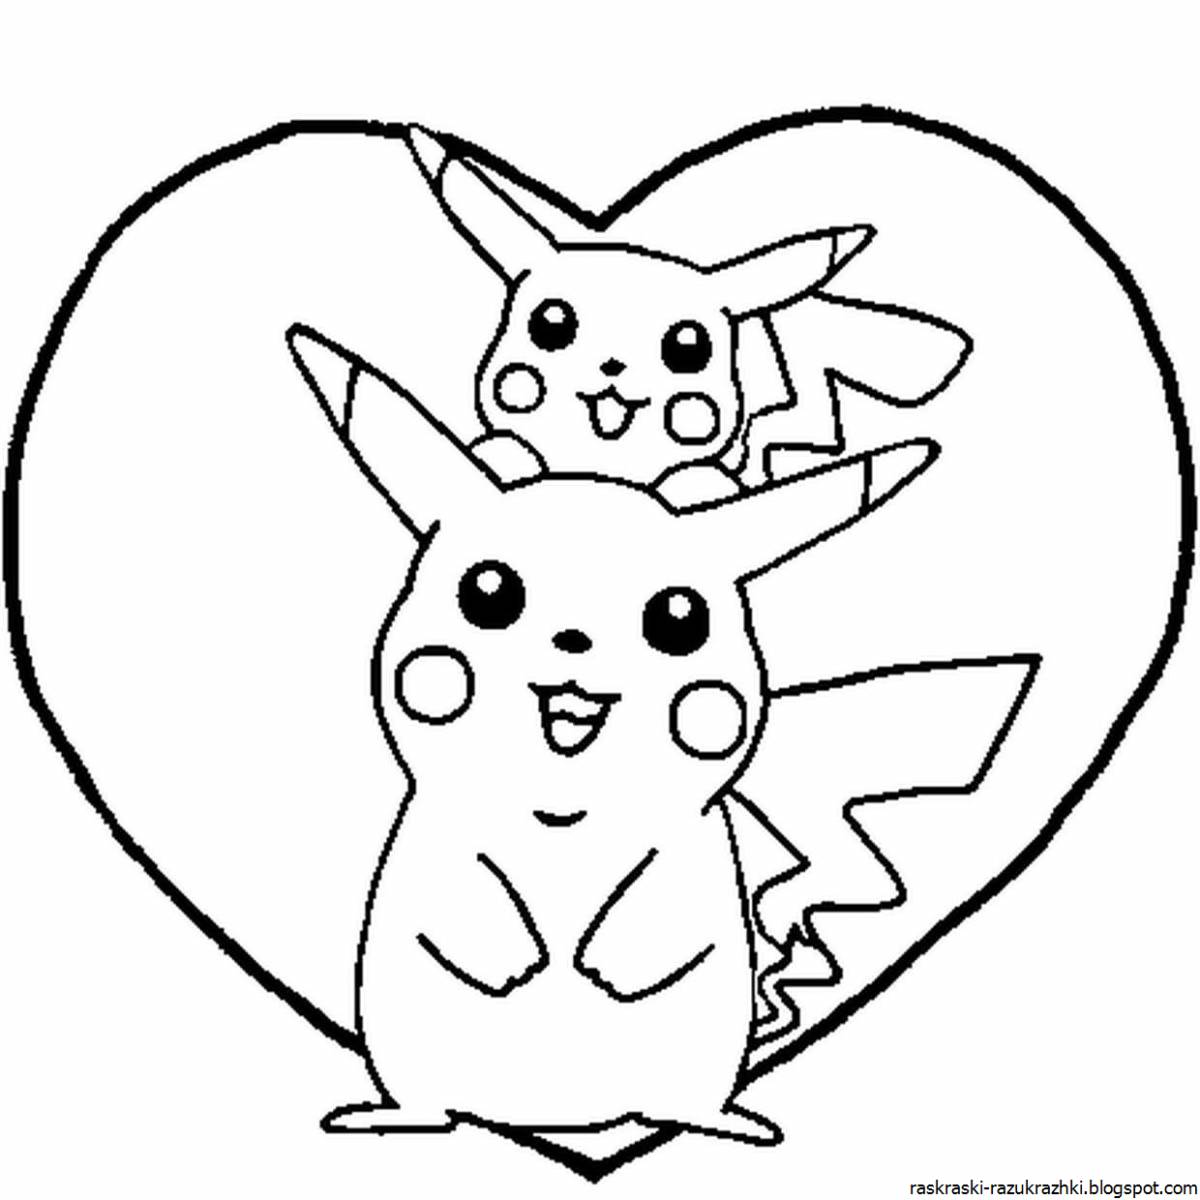 Great pikachu coloring book for kids